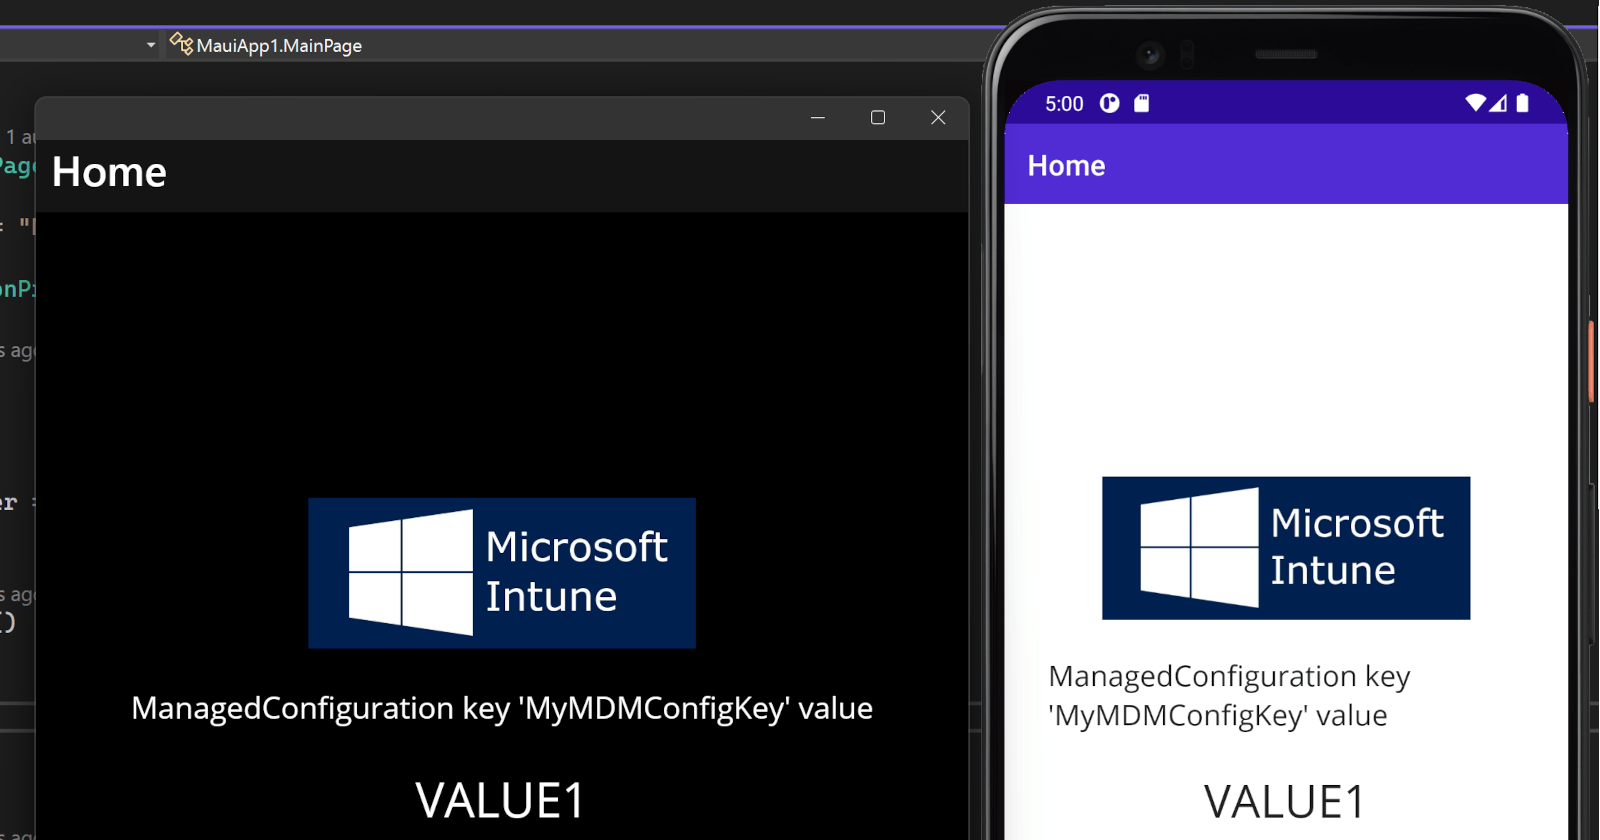 How to develop an MAUI/Xamarin app with MDM support (including Intune example)